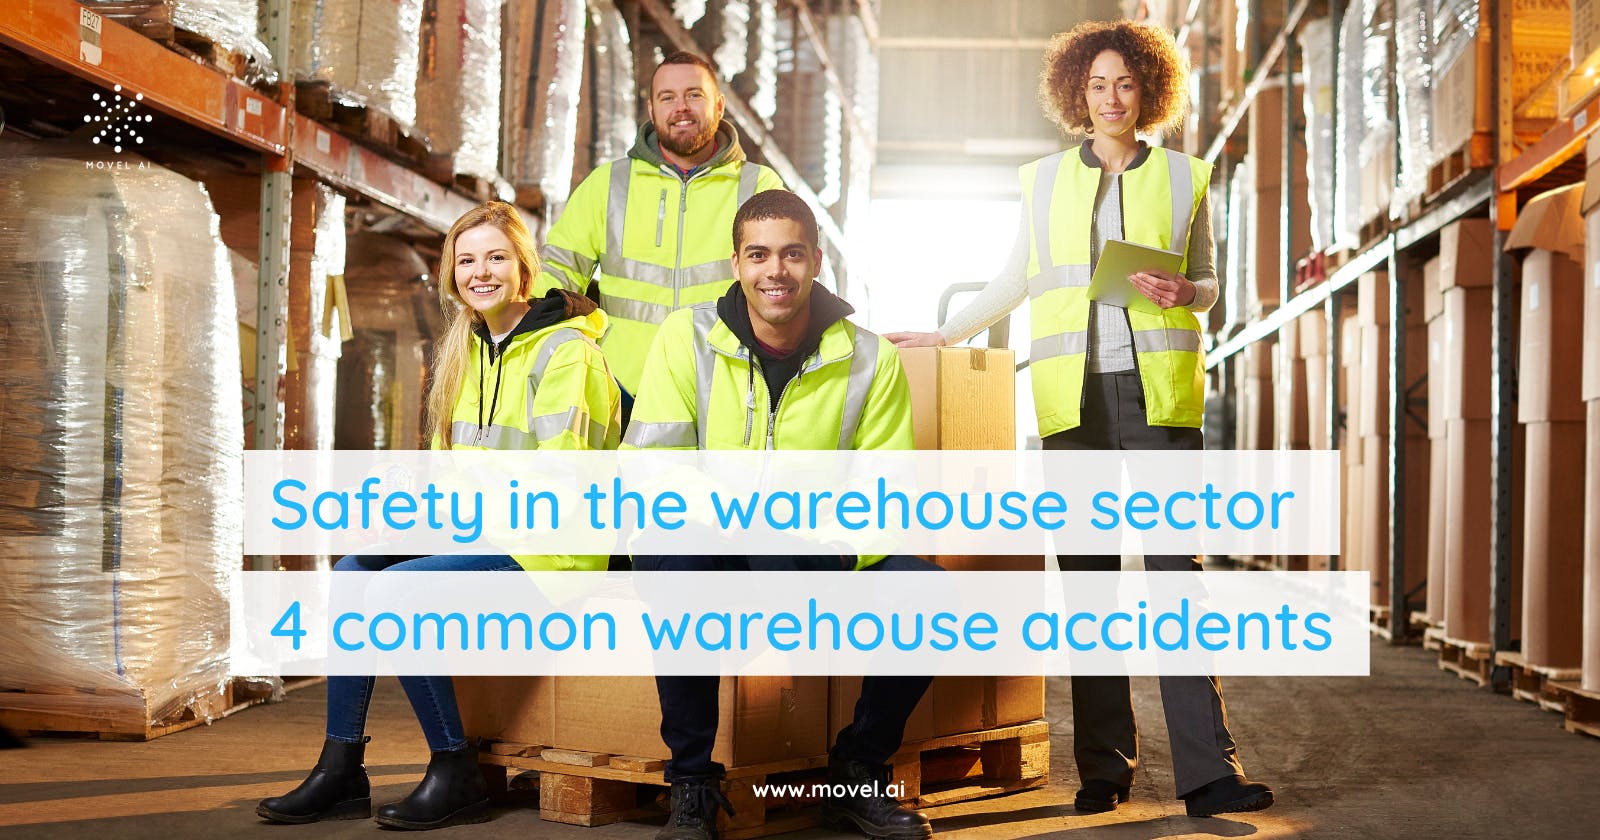 Safety in the warehouse sector: 4 common warehouse accidents